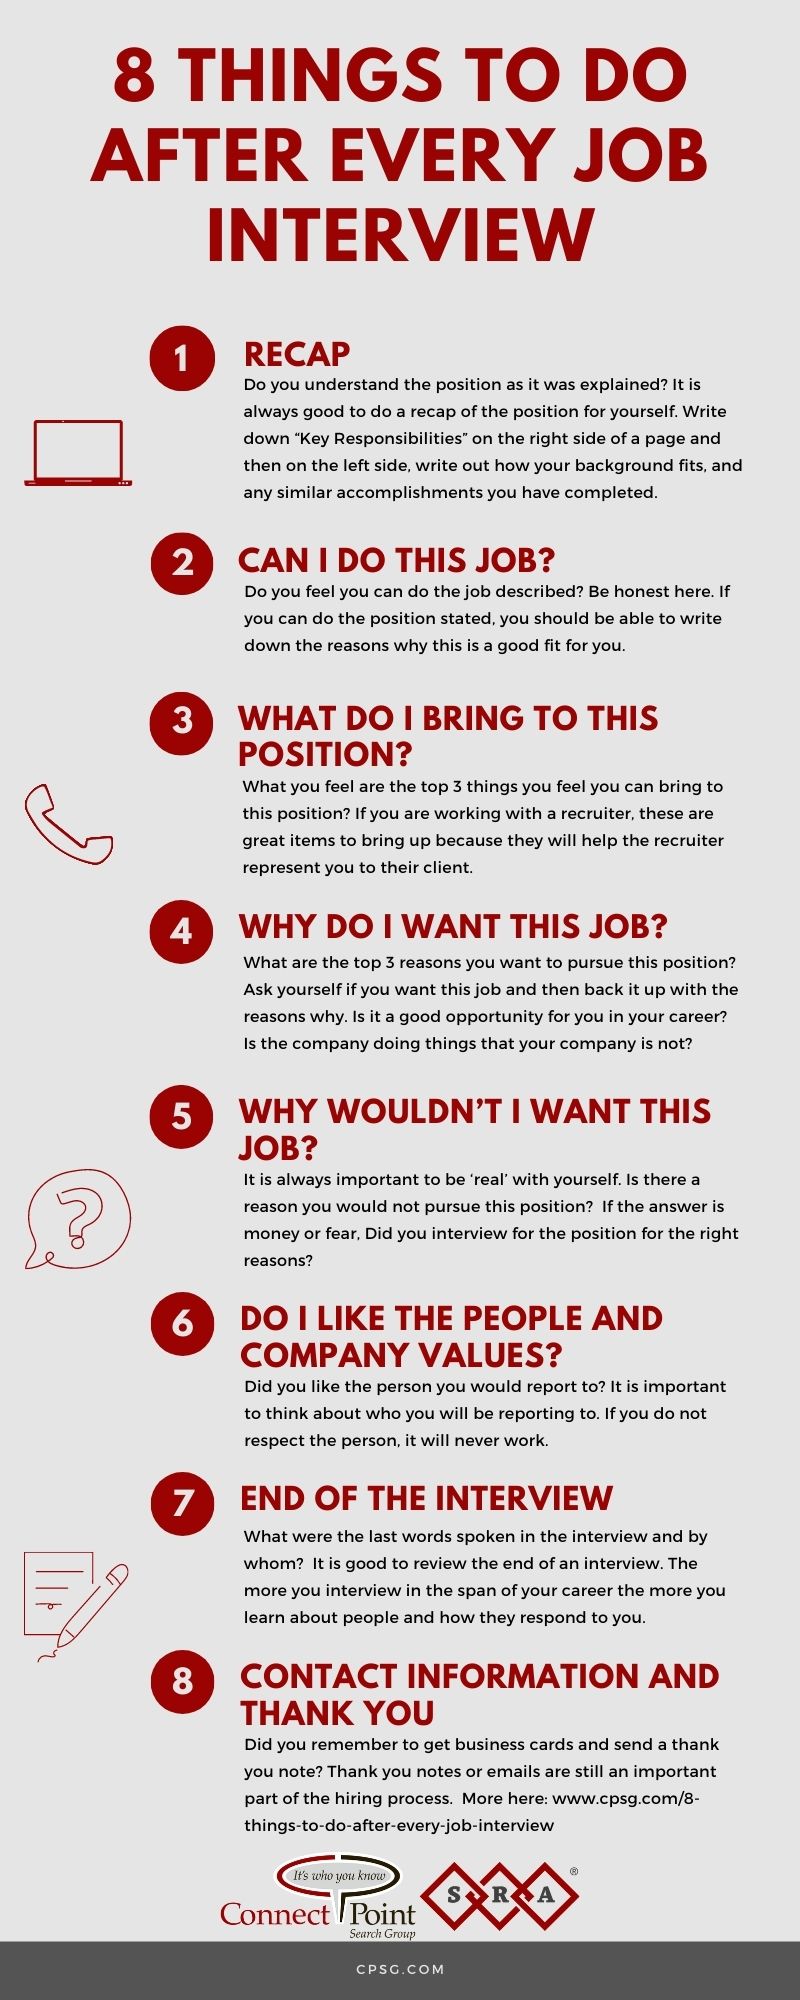 8 Things to do After Every Job Interview